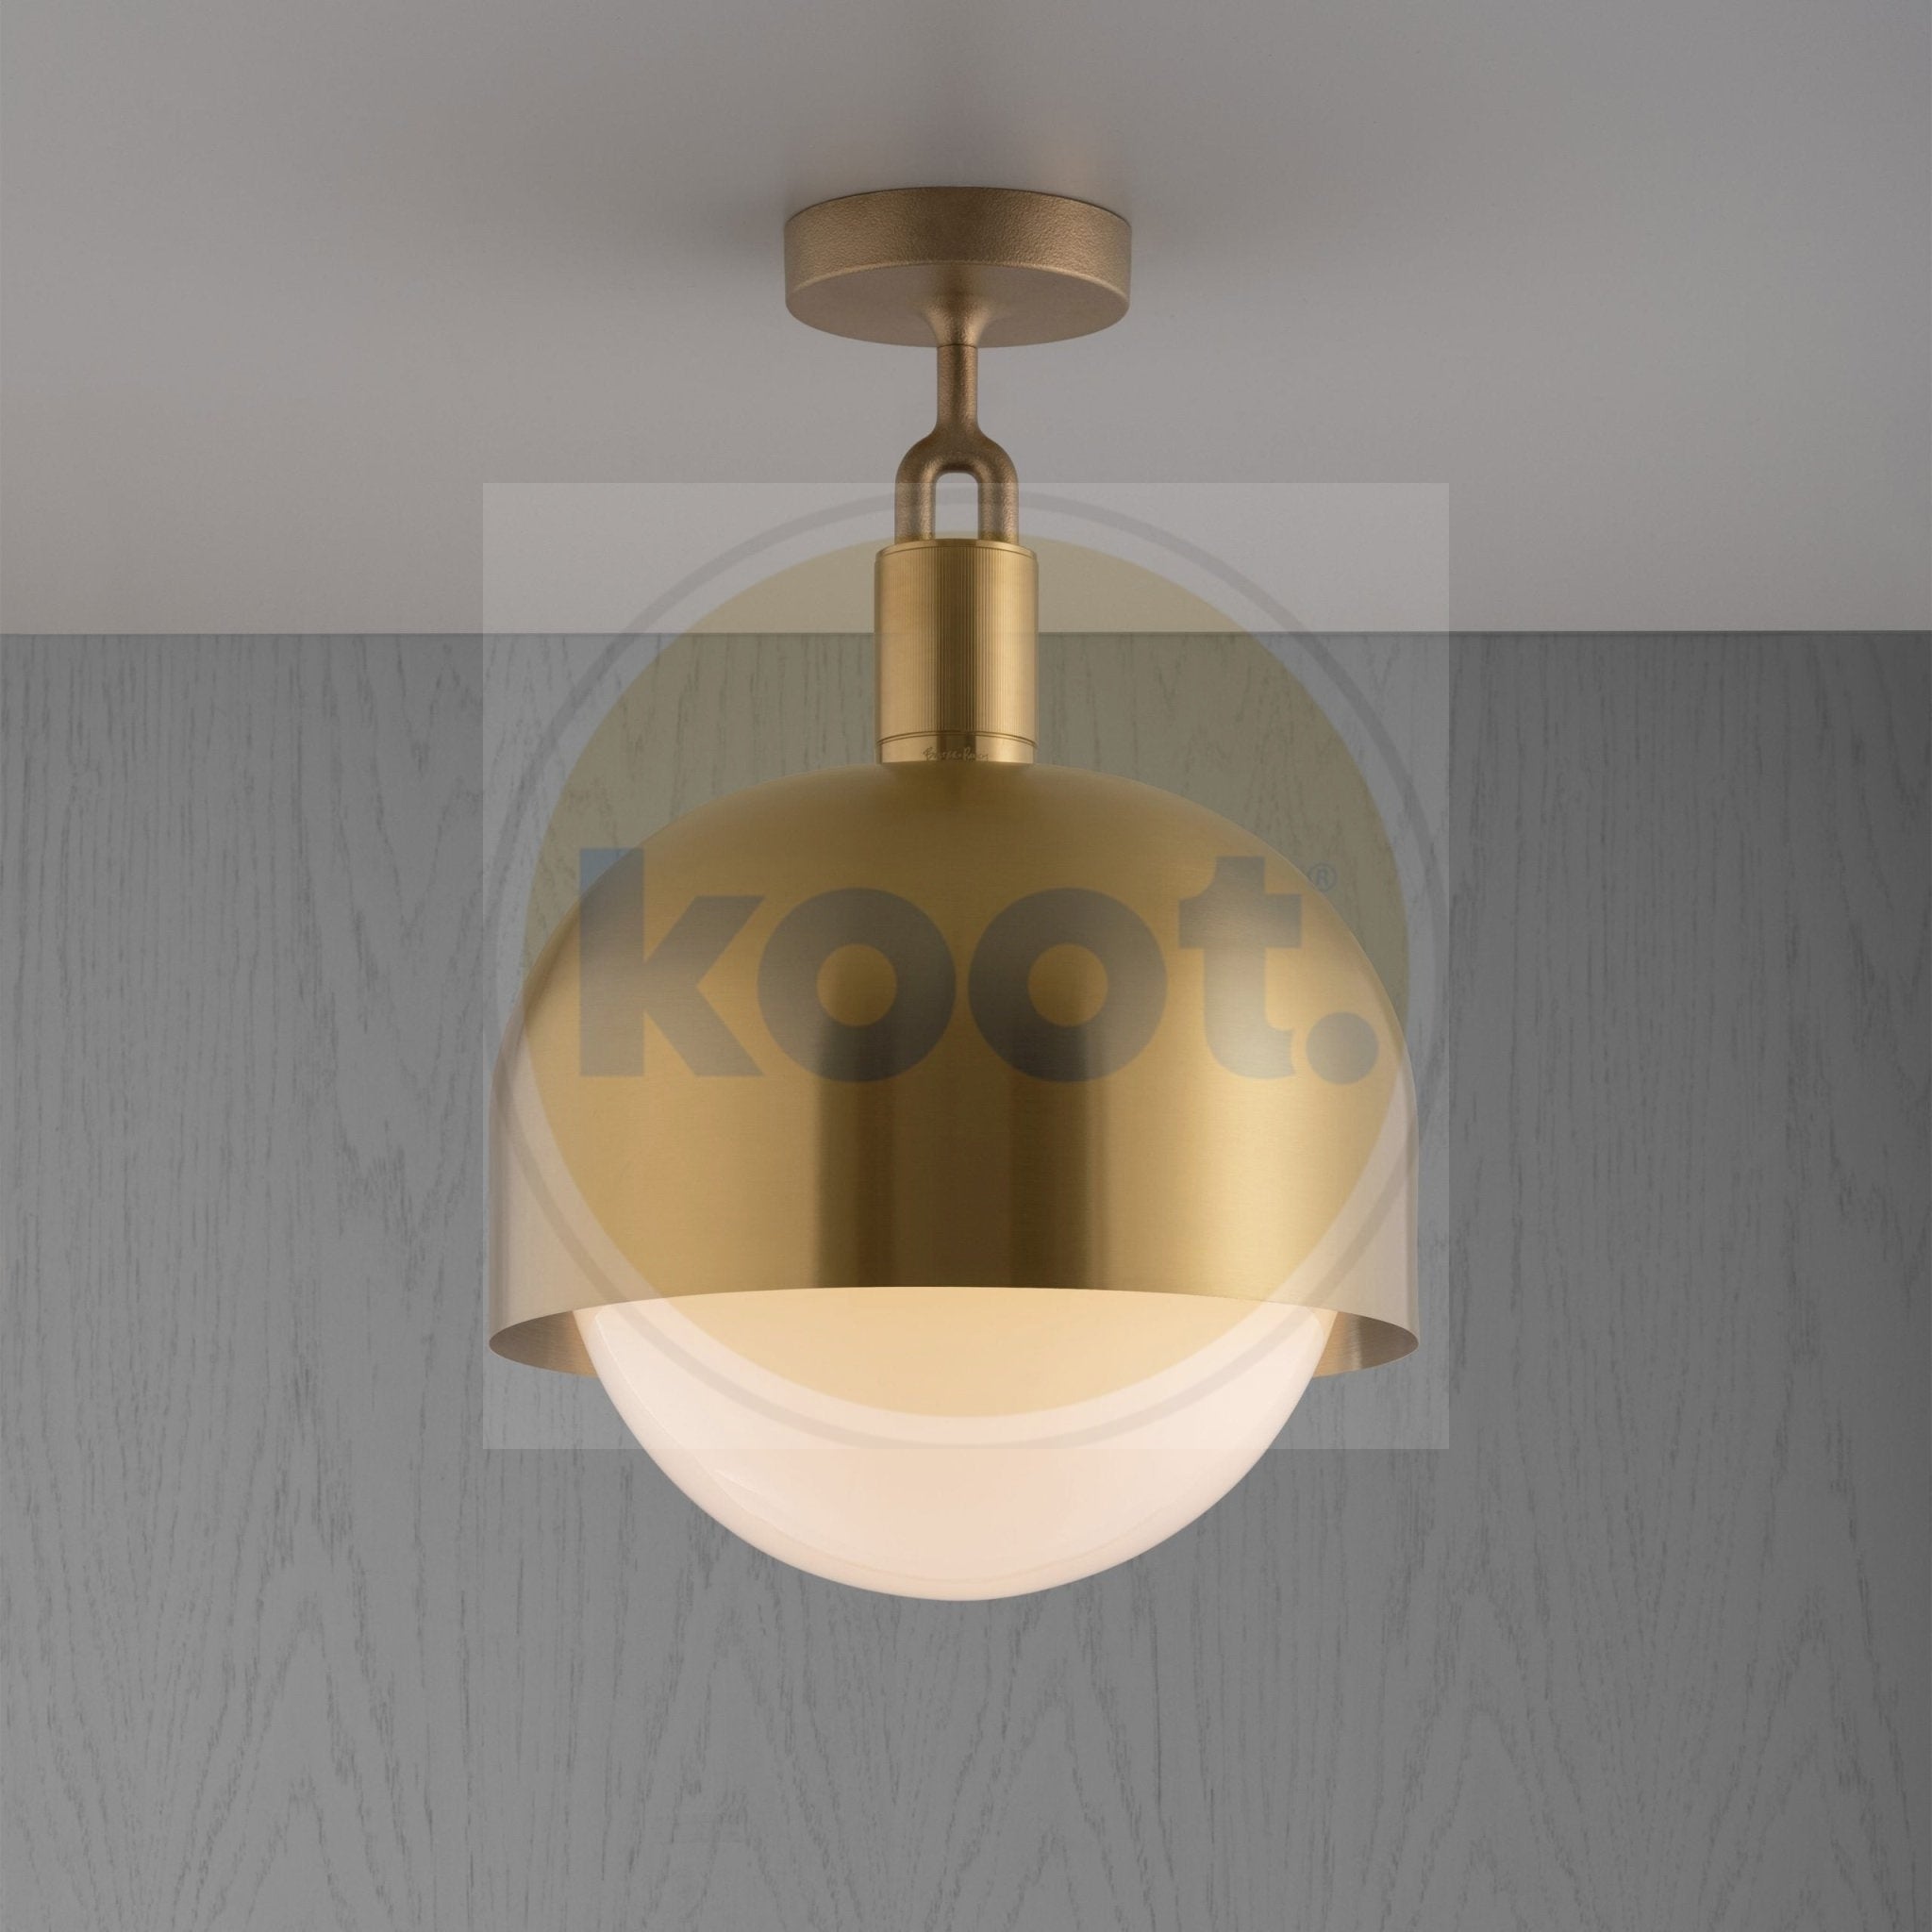 Buster and Punch - Forked Shade Globe Groot Plafondlamp opaal - KOOT